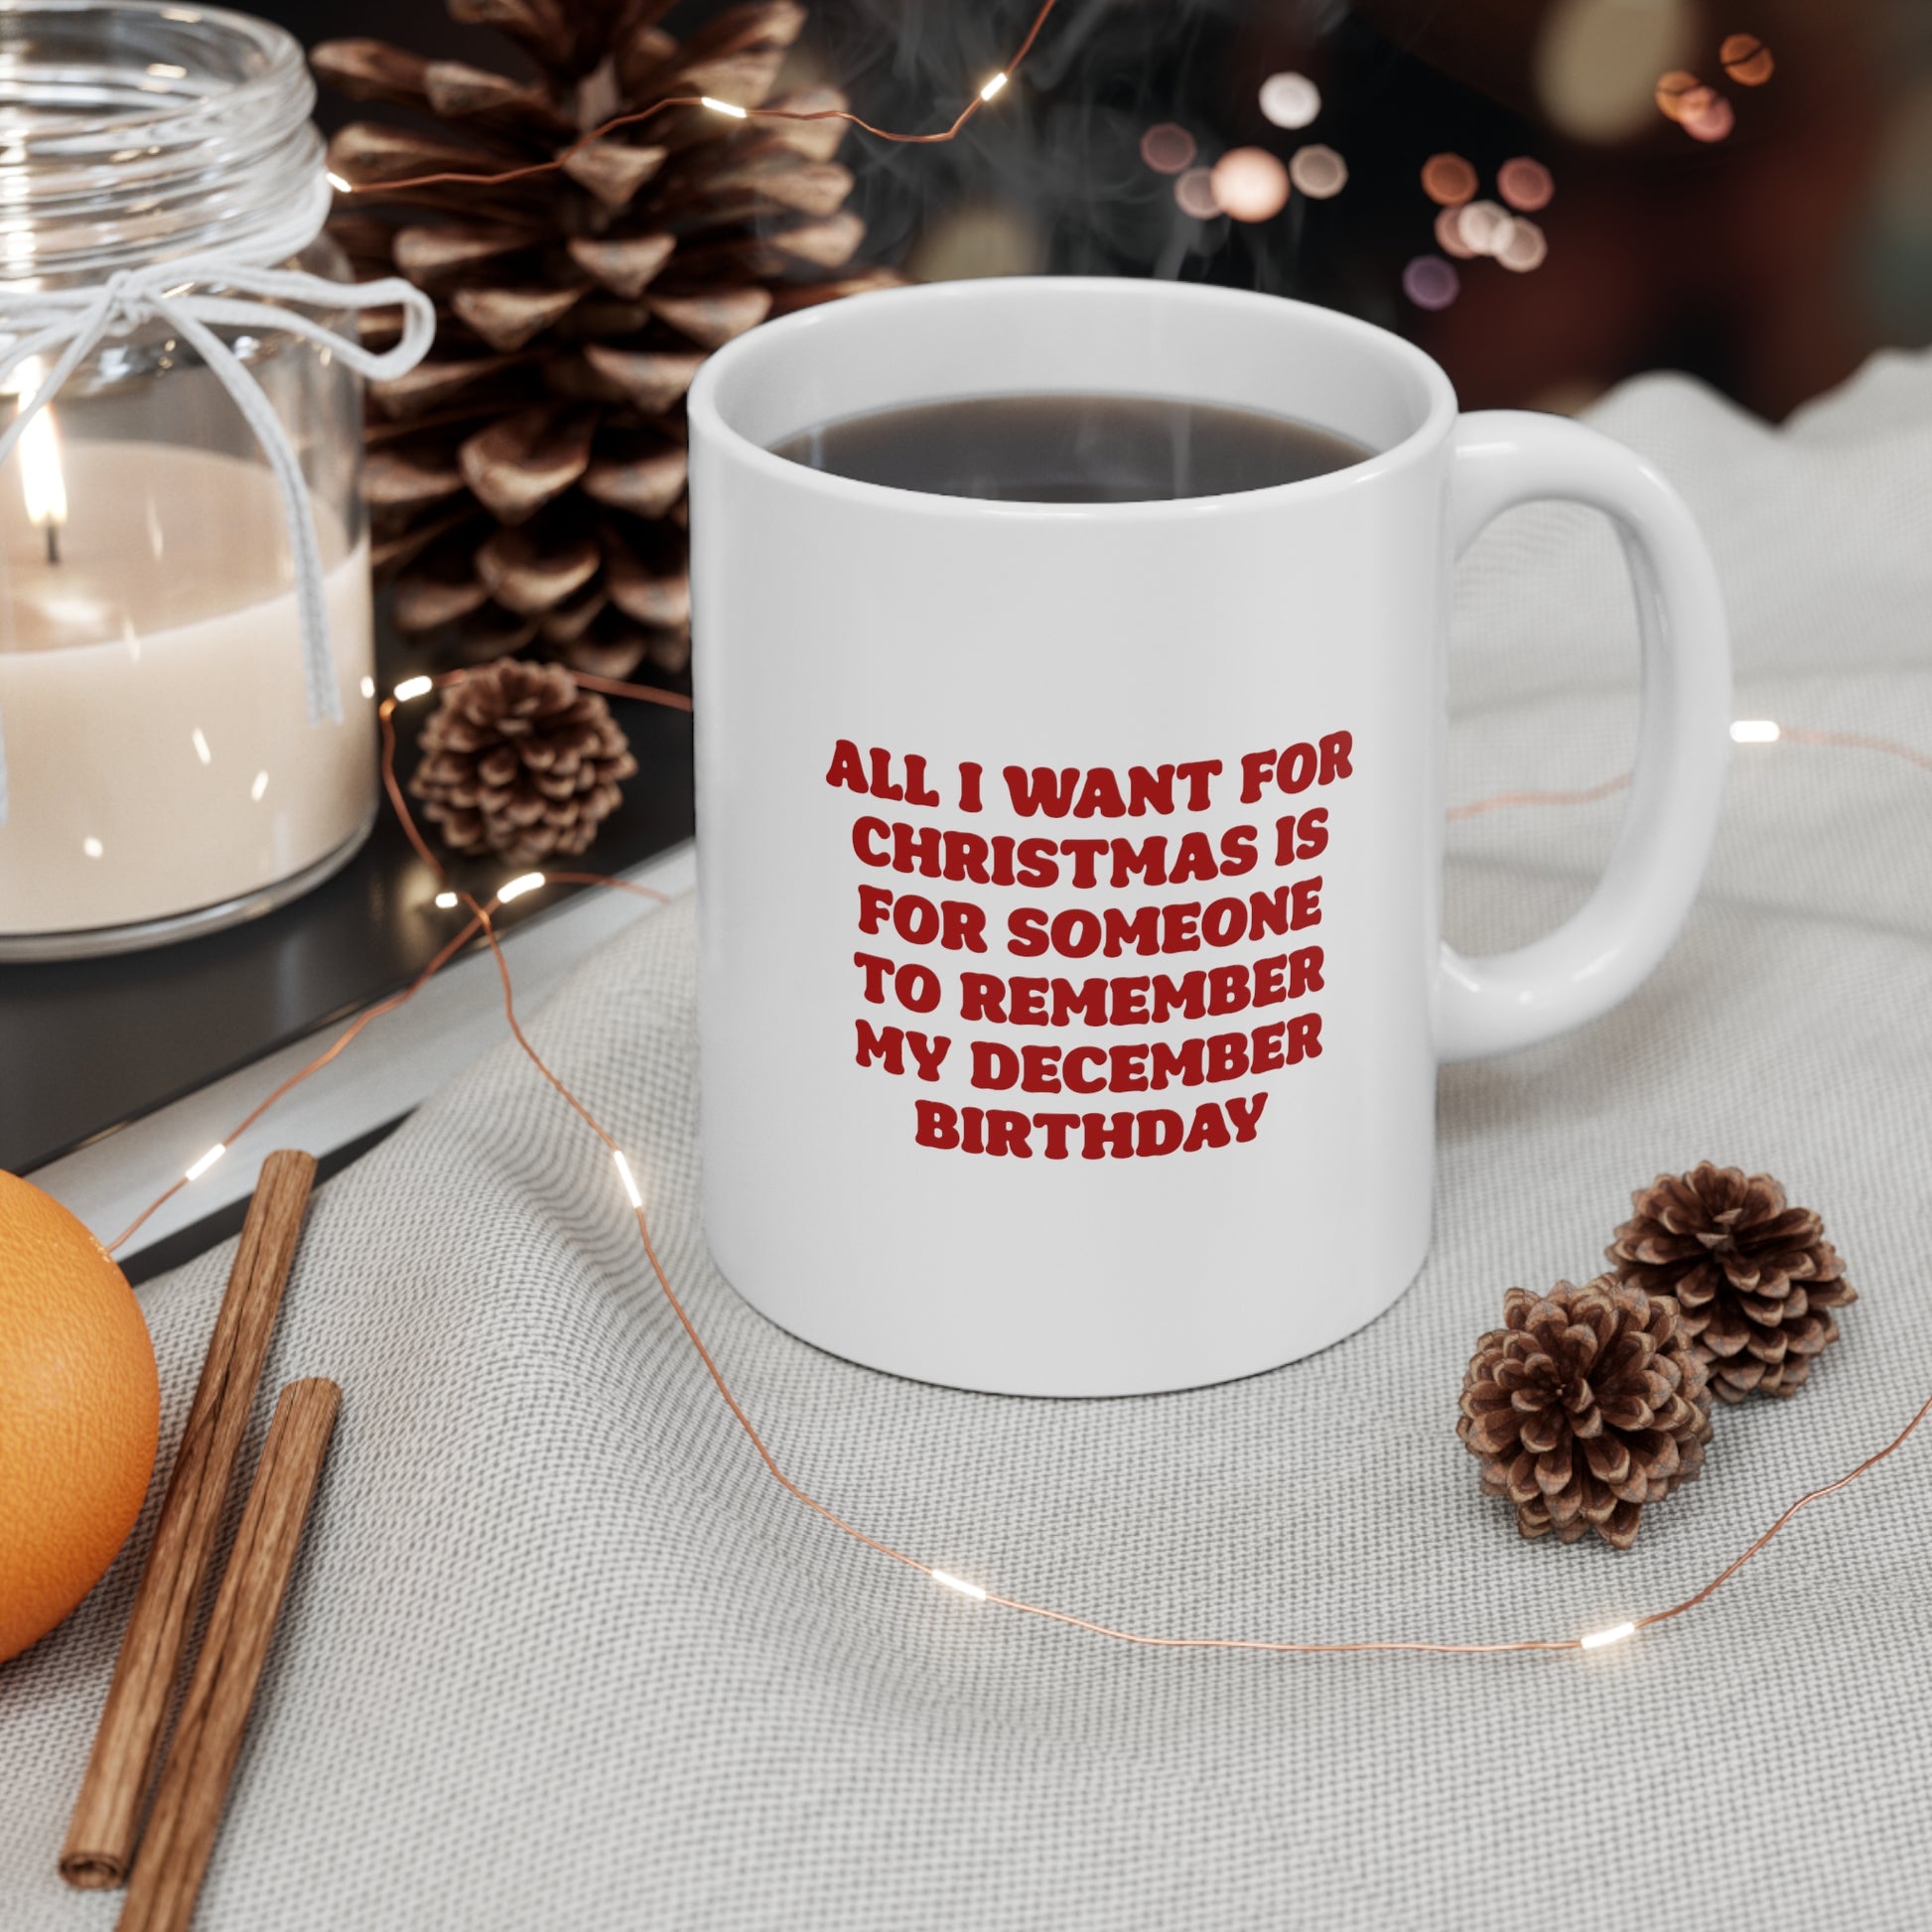 funny mug with quote All i want for christmas is for someone to remember my december birthday